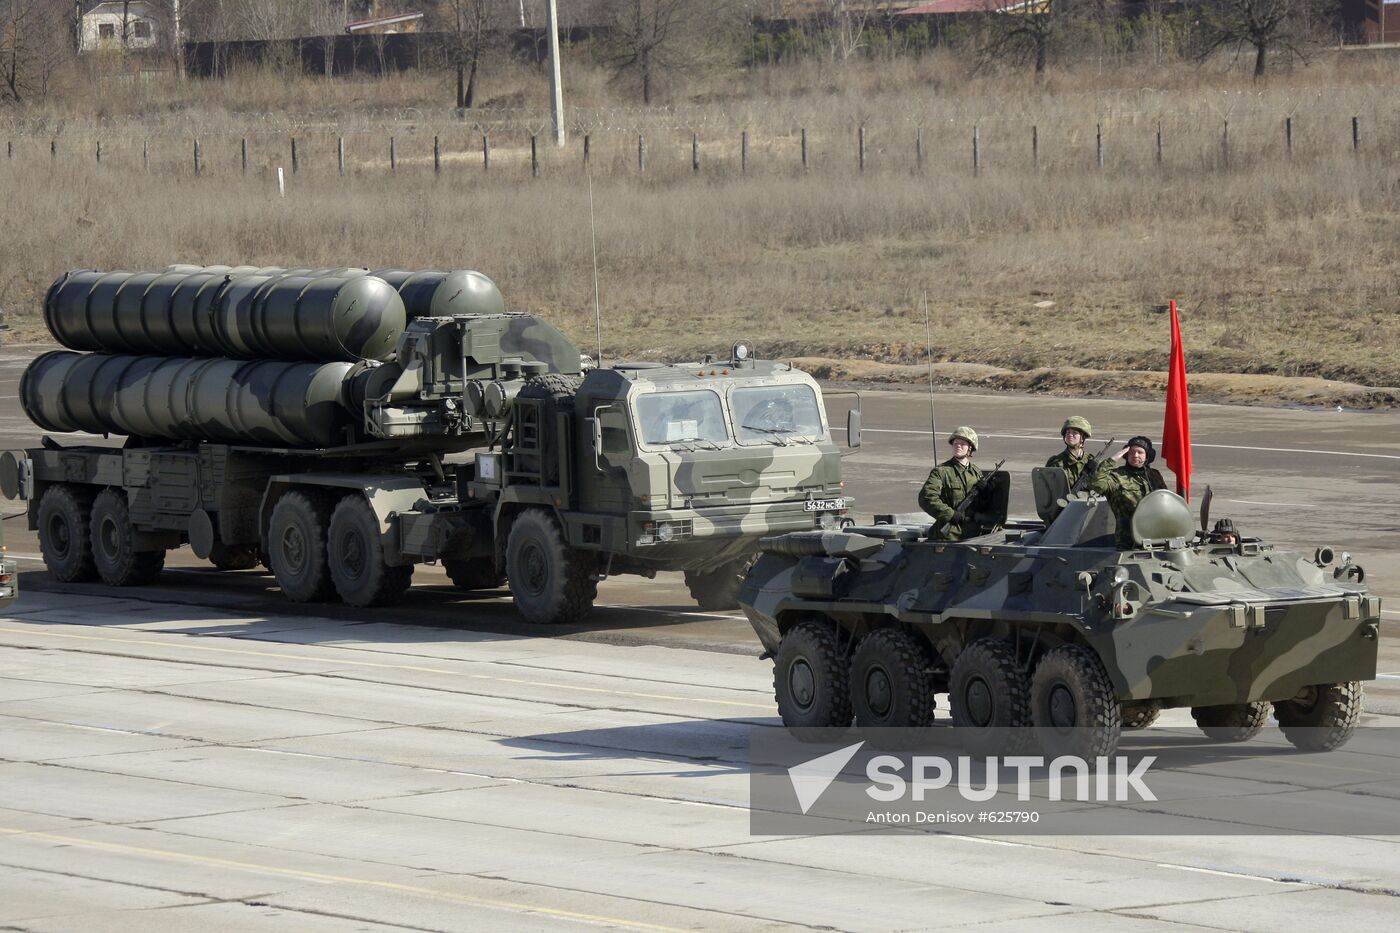 S-400 anti-aircraft missile system launcher